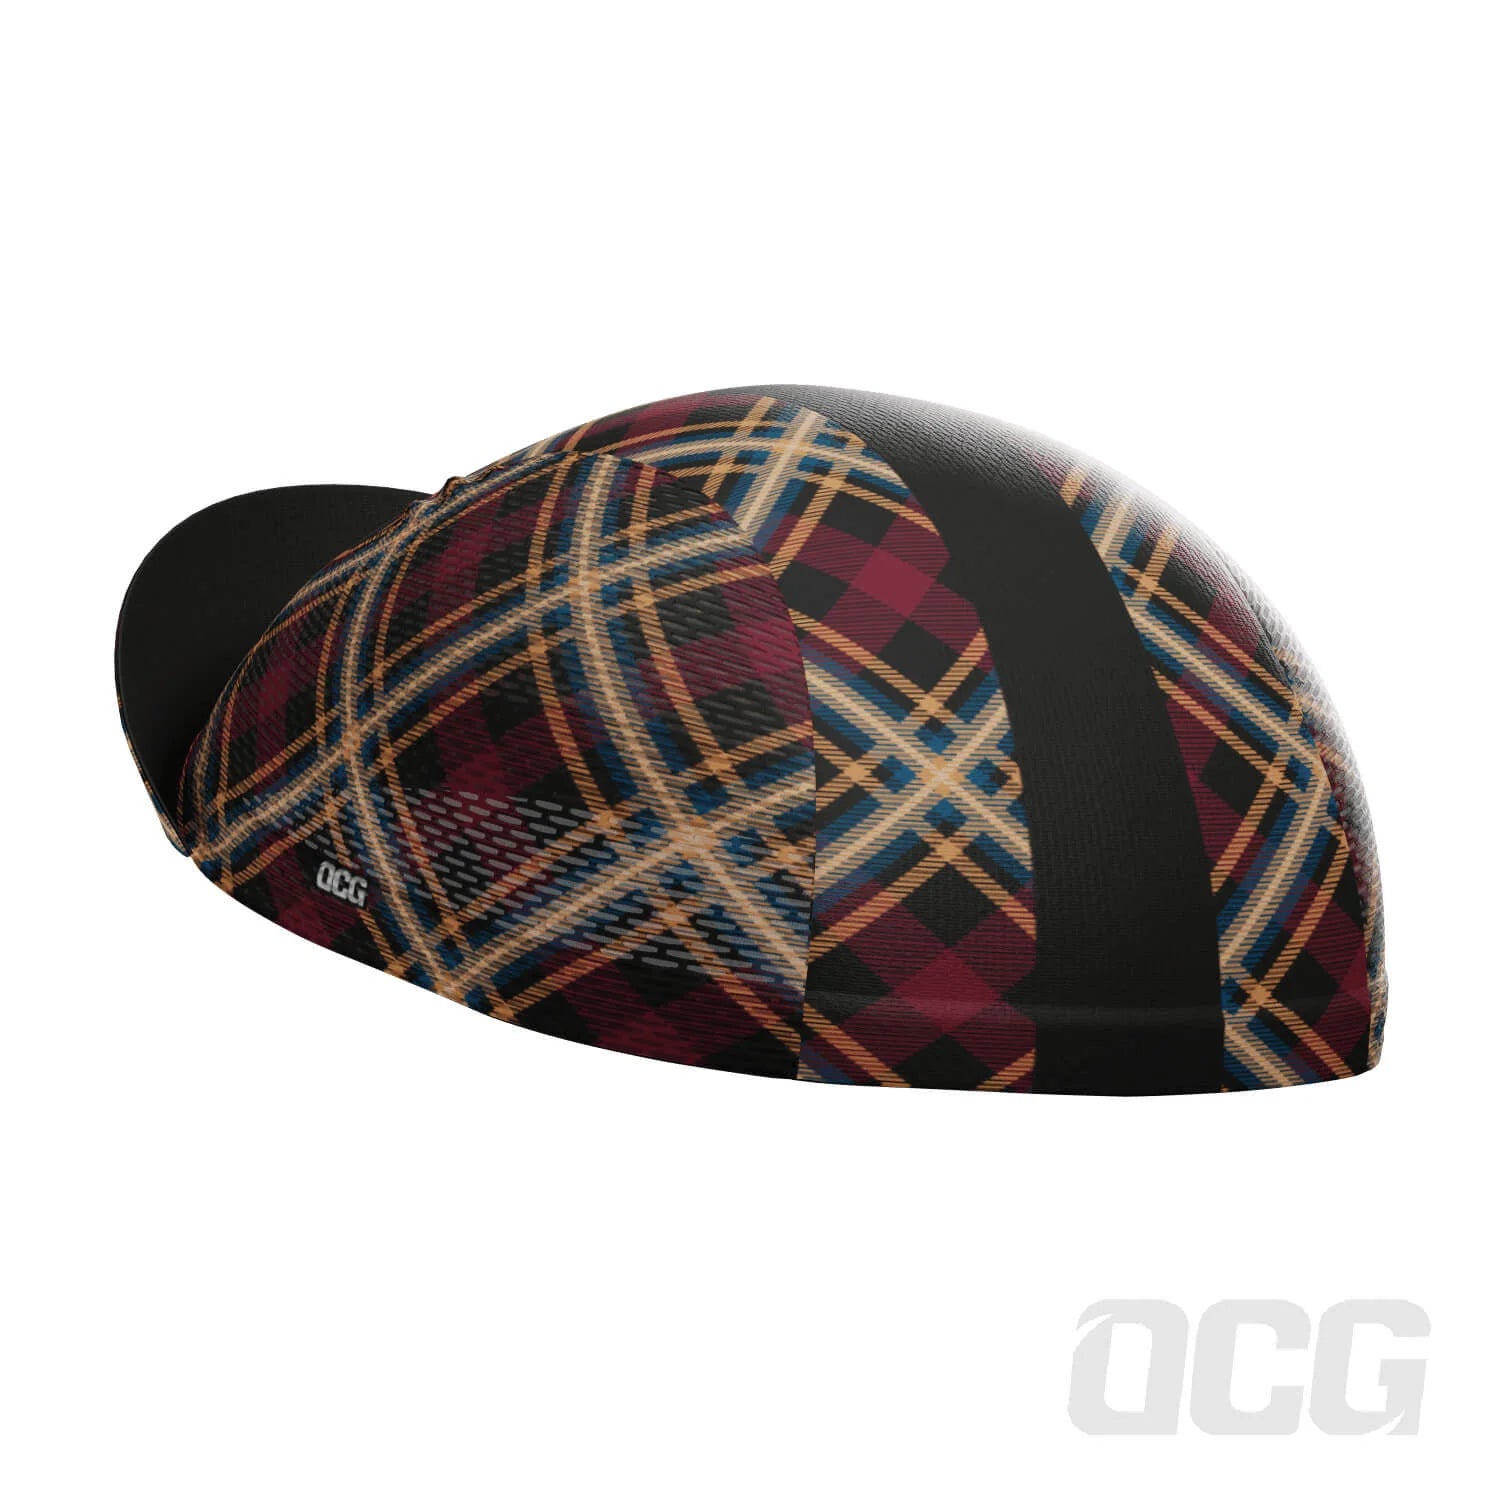 Unisex Red Plaid Checkered Quick Dry Cycling Cap